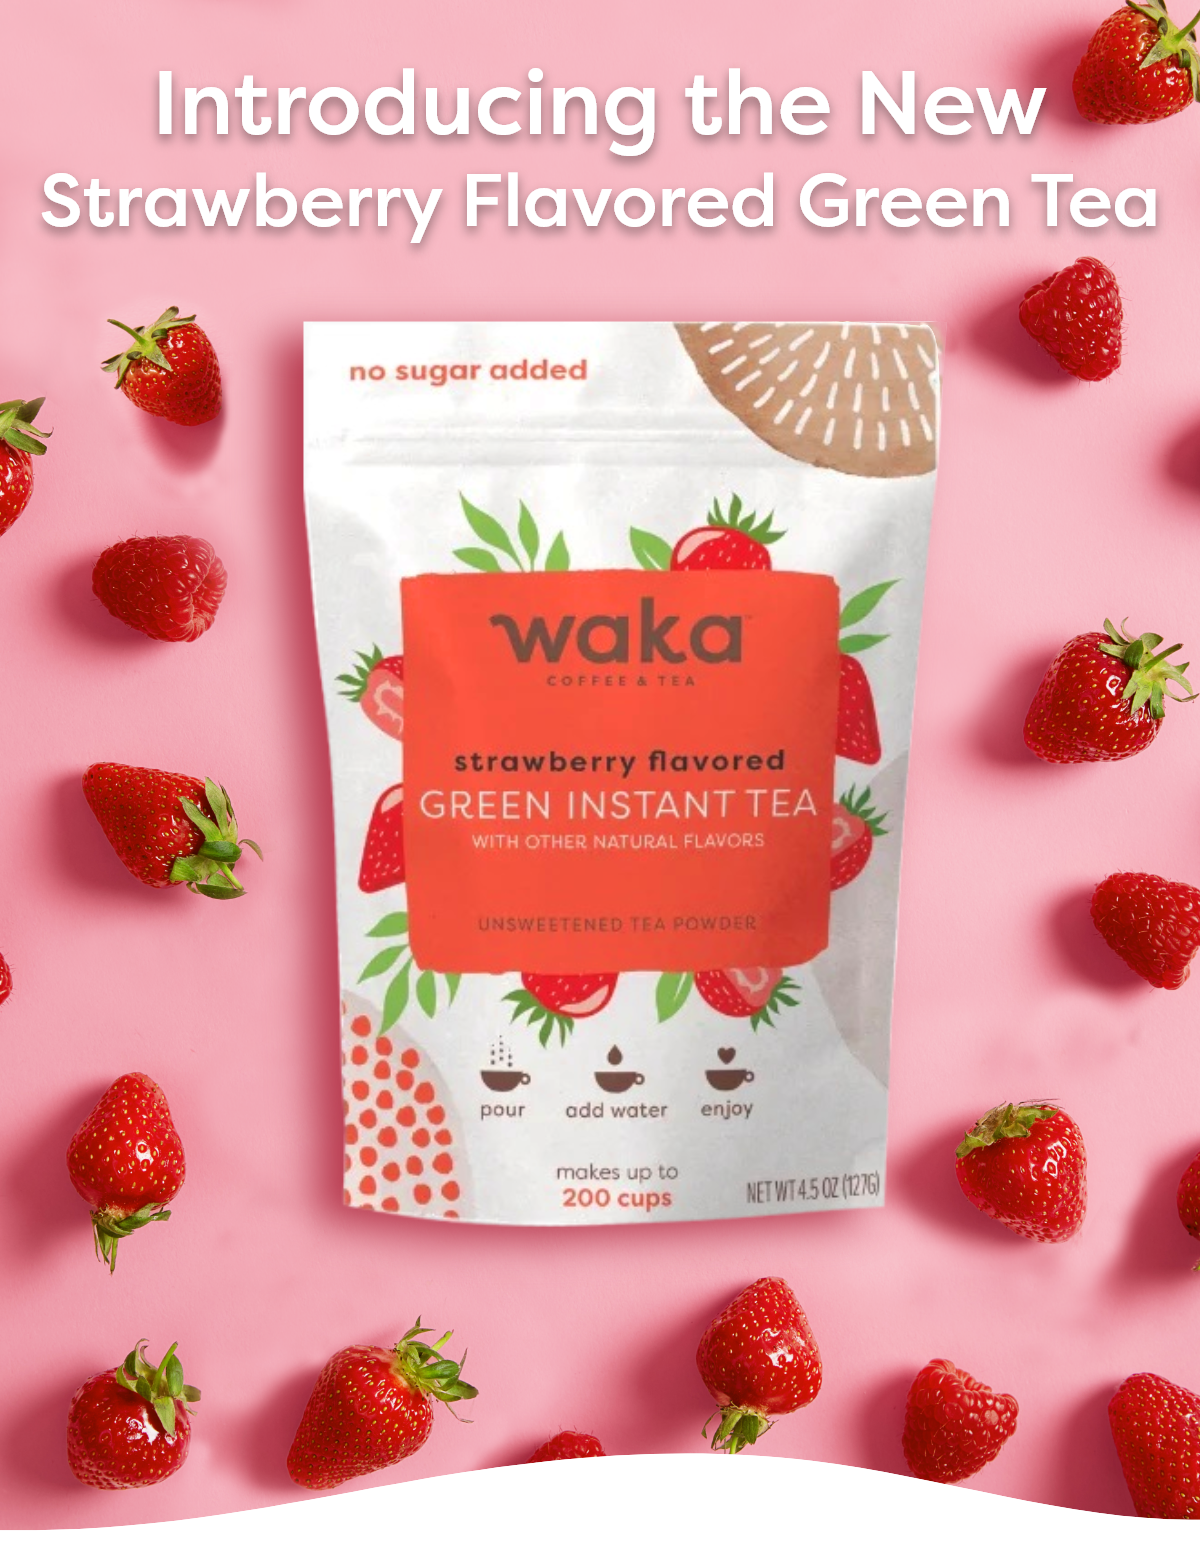 Introducing the New Strawberry Flavored Green Tea